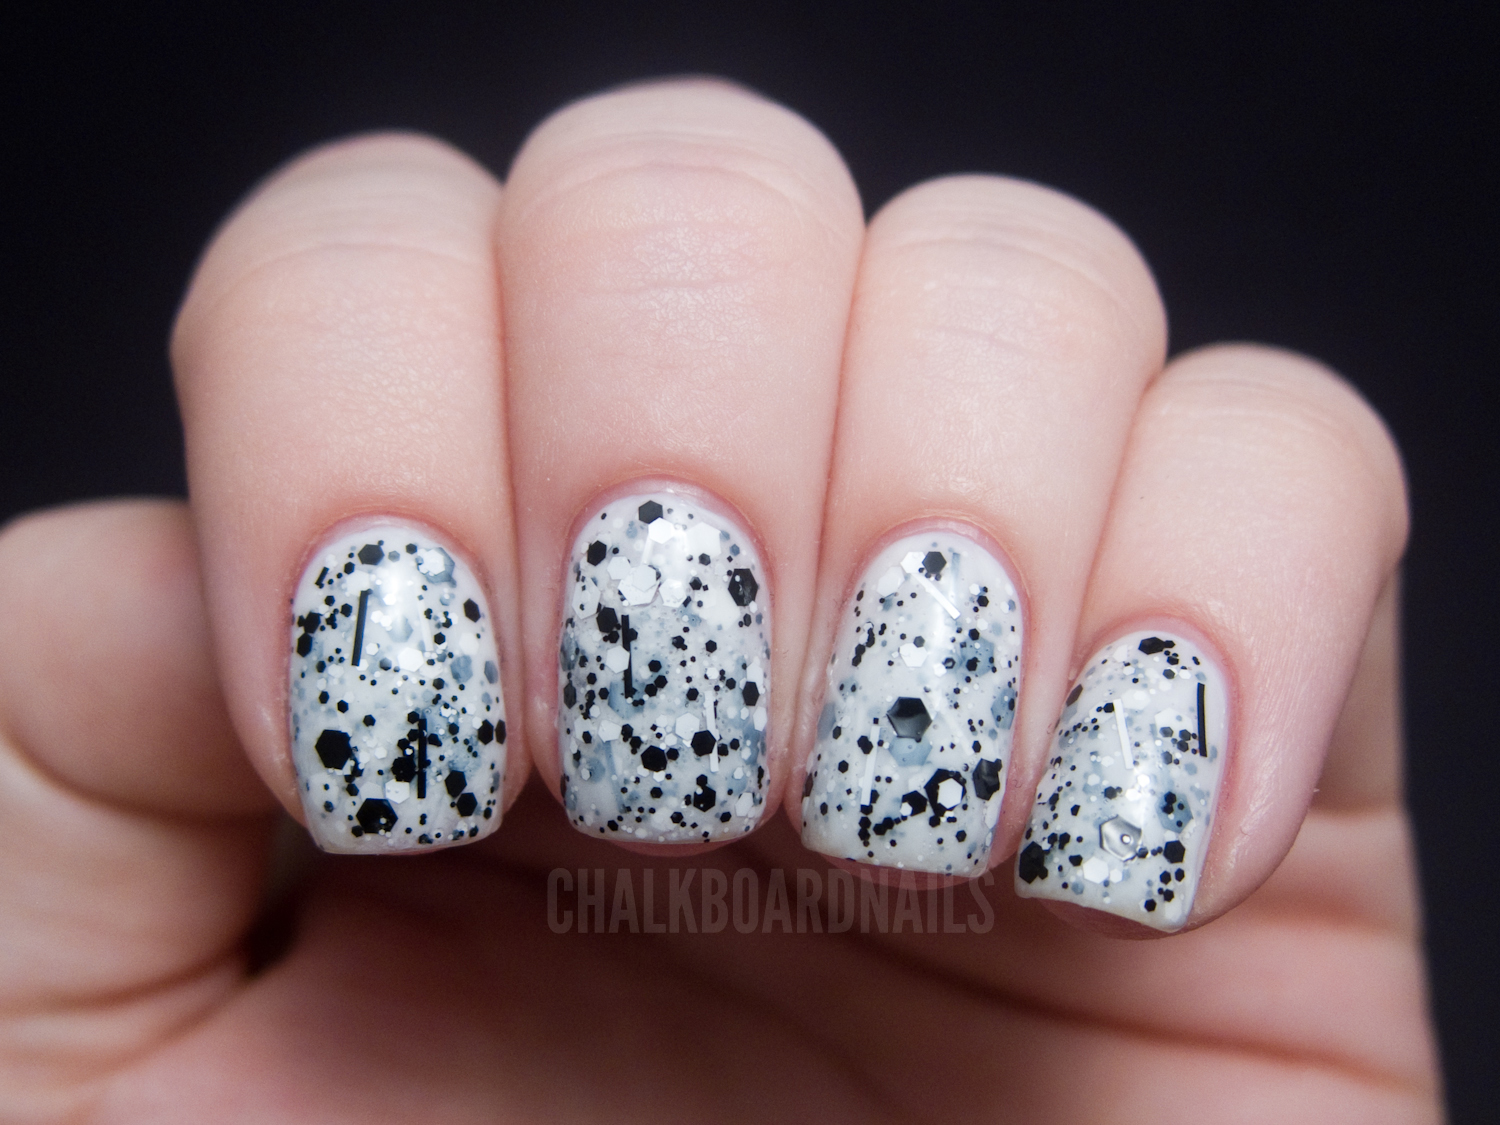 Black and white glitter; Jelly sandwich; Light colors